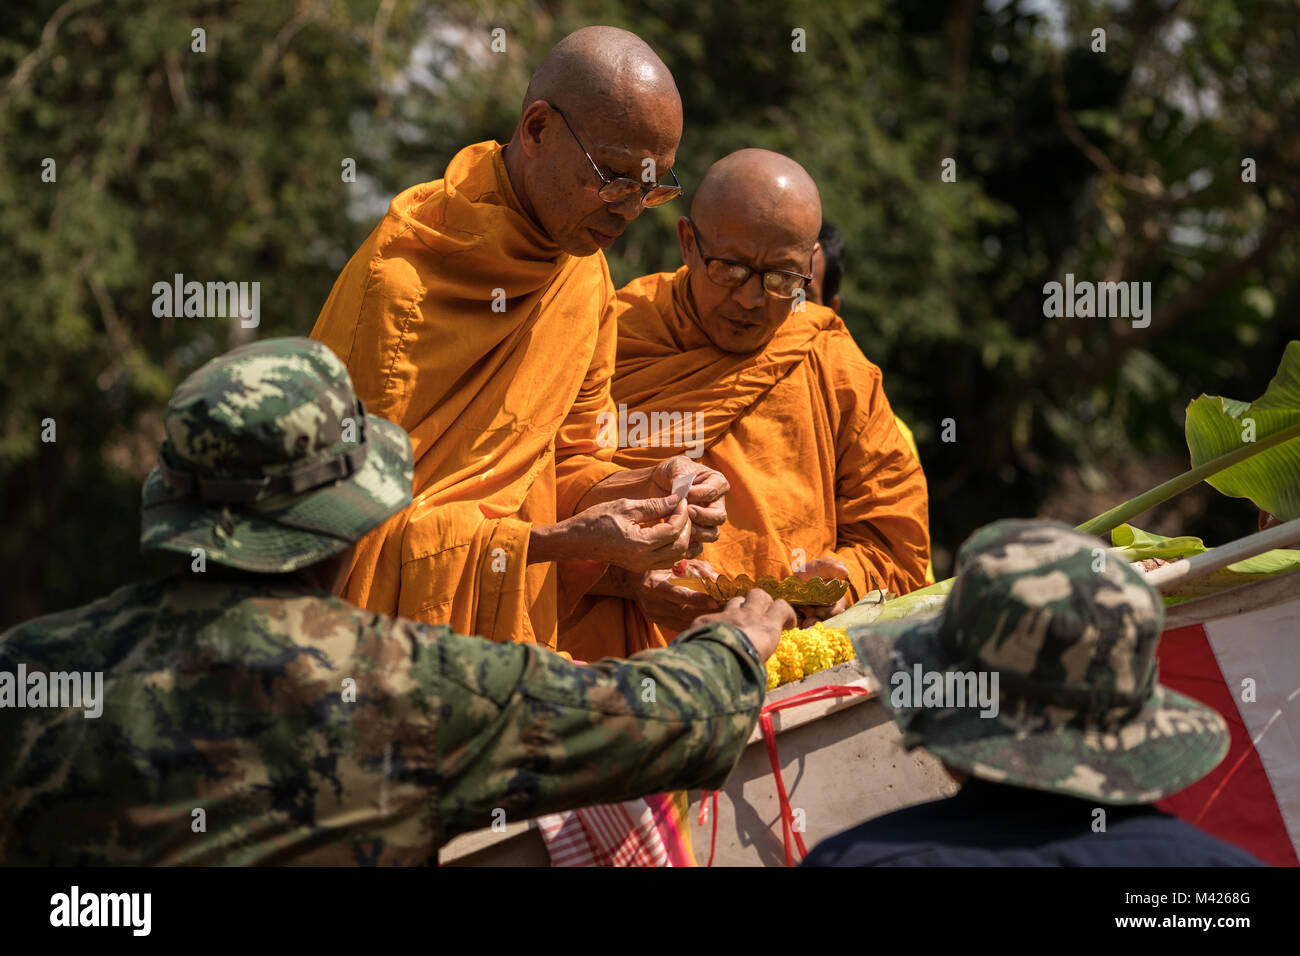 Buddhist monks bless the main pillar for a school building during a ceremony in support of Exercise Cobra Gold 2018 at Banthungsohongsa School in Chachoengsao, Kingdom of Thailand, Jan. 31, 2018. Humanitarian civic assistance projects conducted during the exercise support the needs and humanitarian interests of the Thai people. Cobra Gold 18 is an annual exercise conducted in the Kingdom of Thailand and runs from Feb. 13-23 with seven full participating nations. (U.S. Marine Corps photo by Sgt. Matthew J. Bragg) Stock Photo